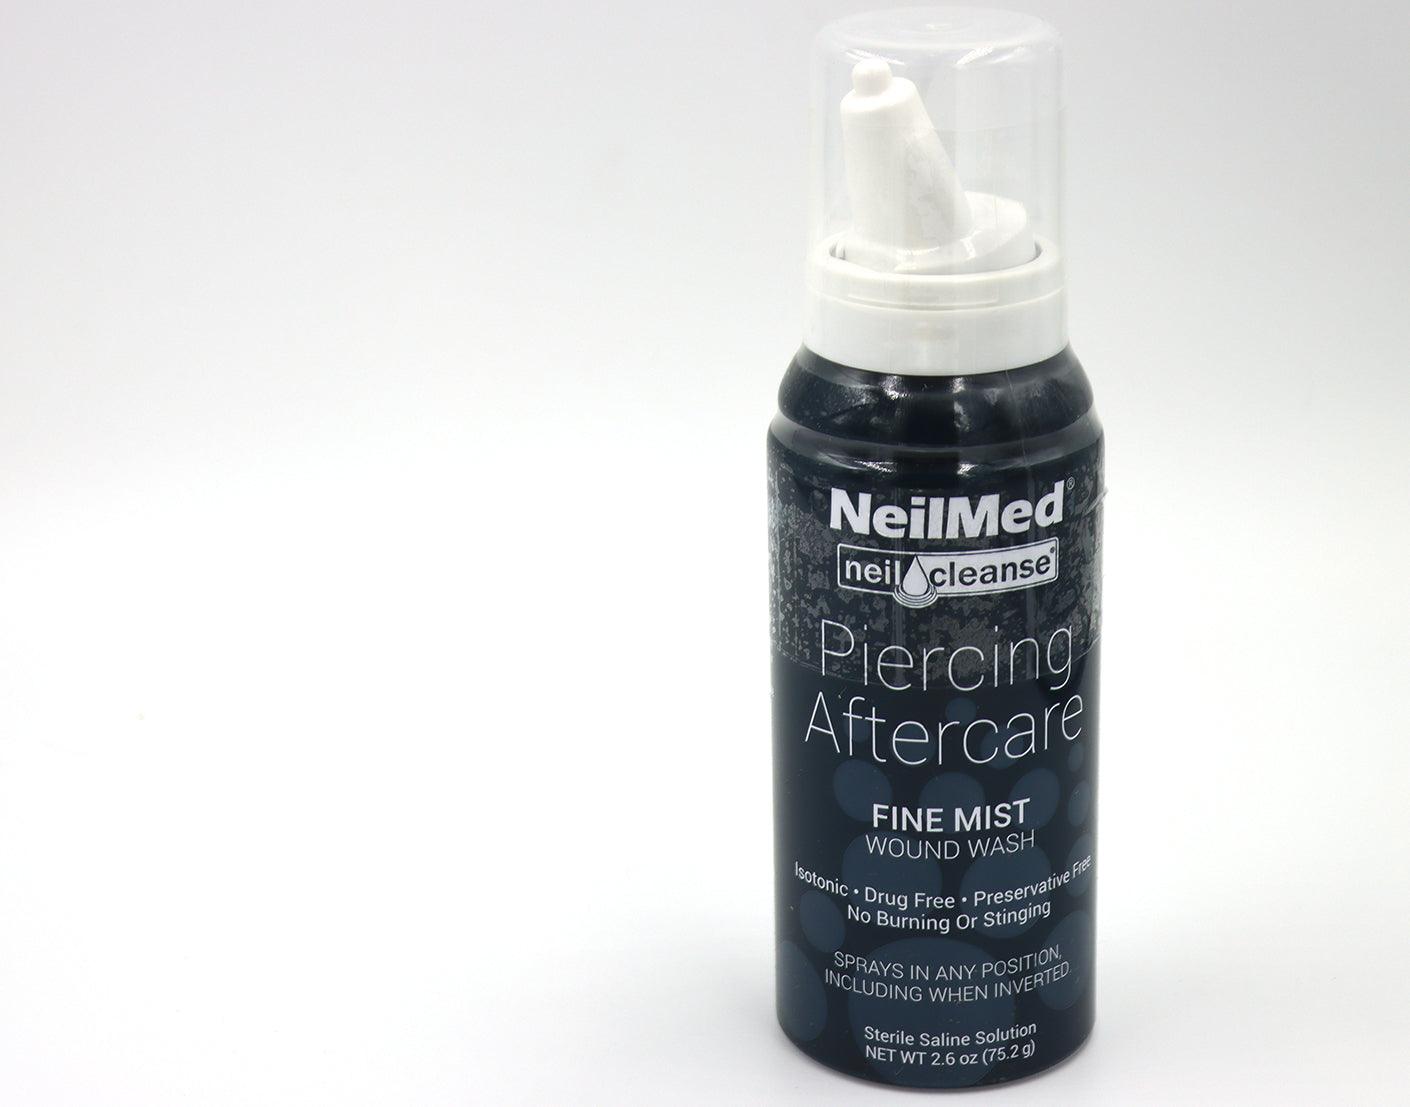 NeilMed NeilCleanse Fine Mist Wound Wash Piercing Aftercare - Born This Way Body Arts